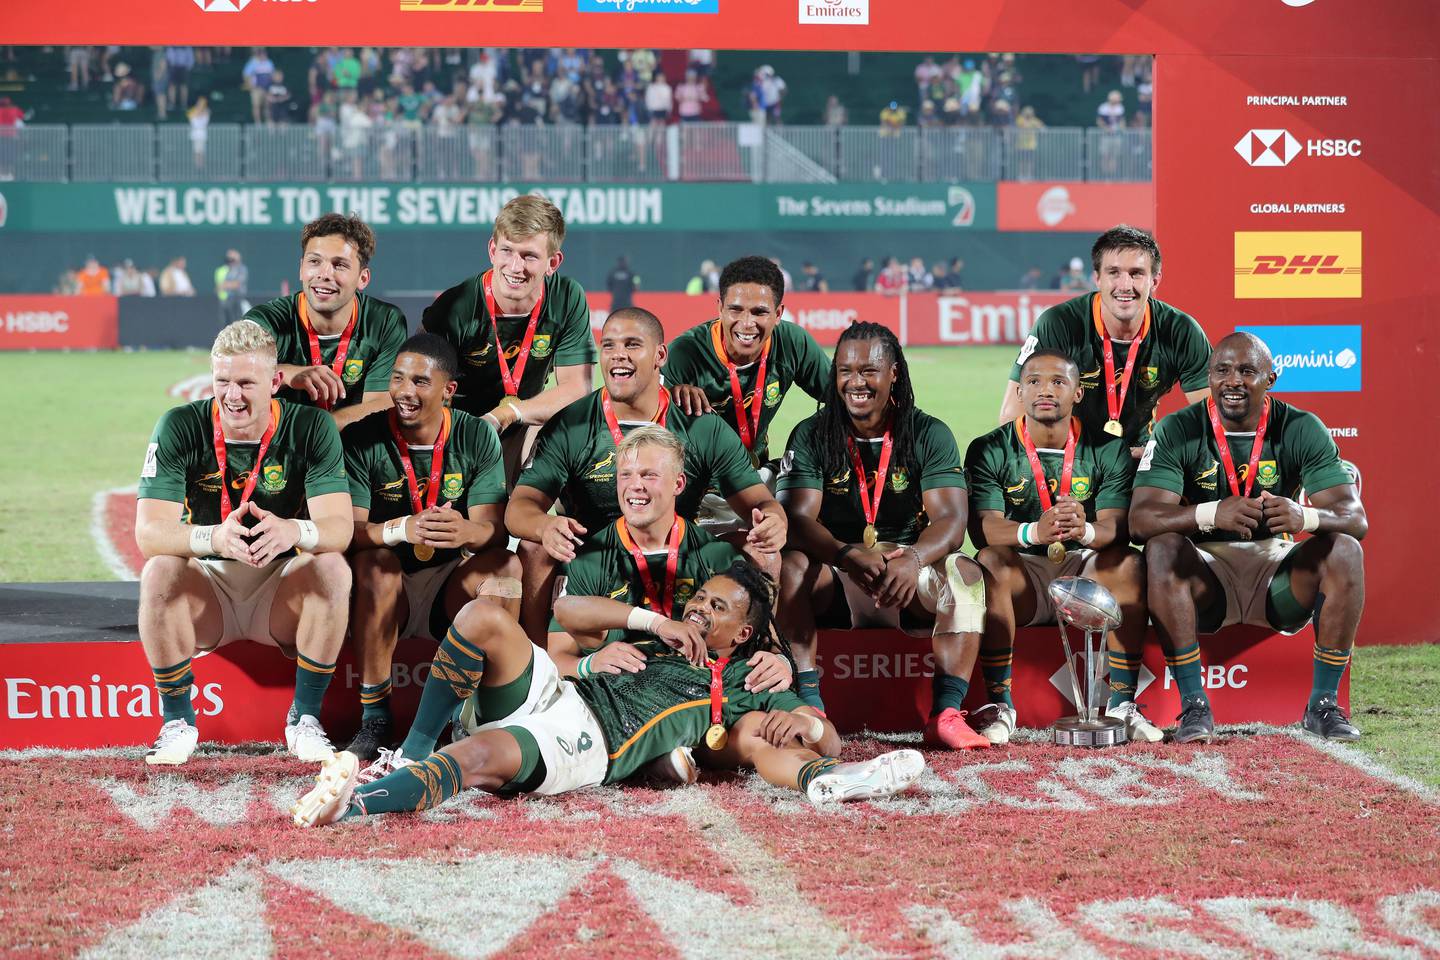 South Africa celebrate winning the men's HSBC World Rugby Sevens series in Dubai on December 4, 2021. Chris Whiteoak / The National